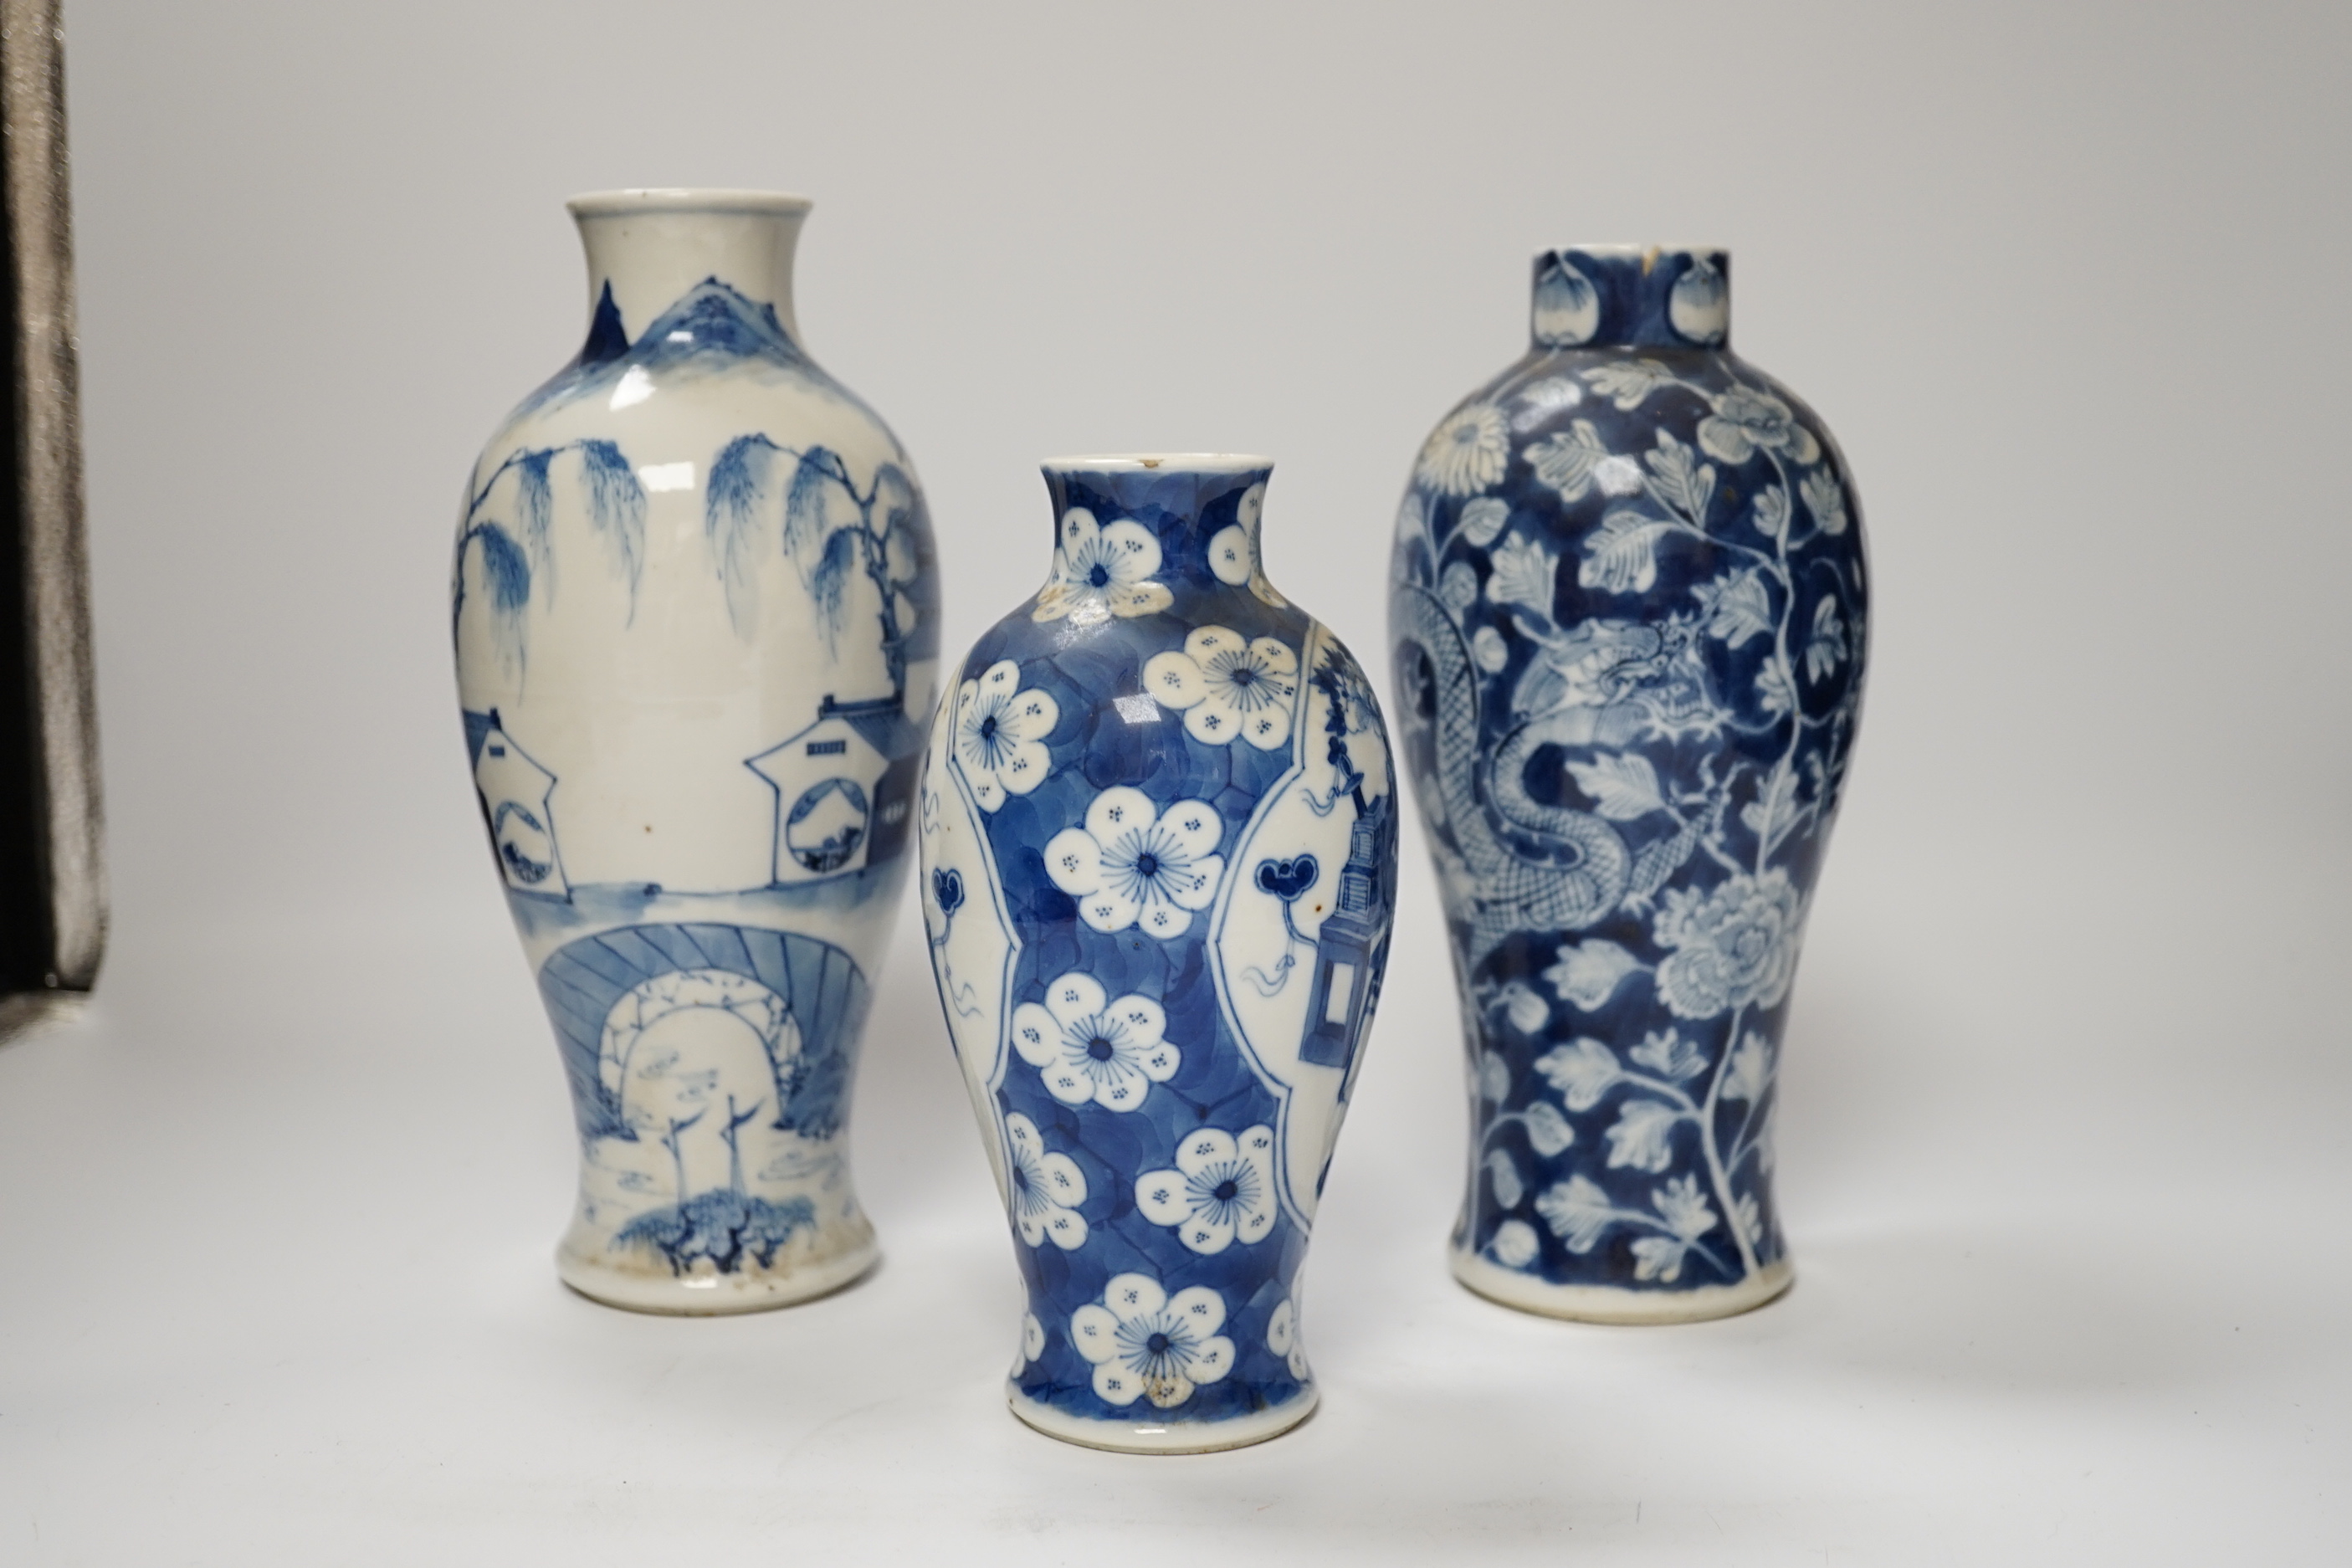 Three 19th century Chinese blue and white vases, tallest 23.5cm